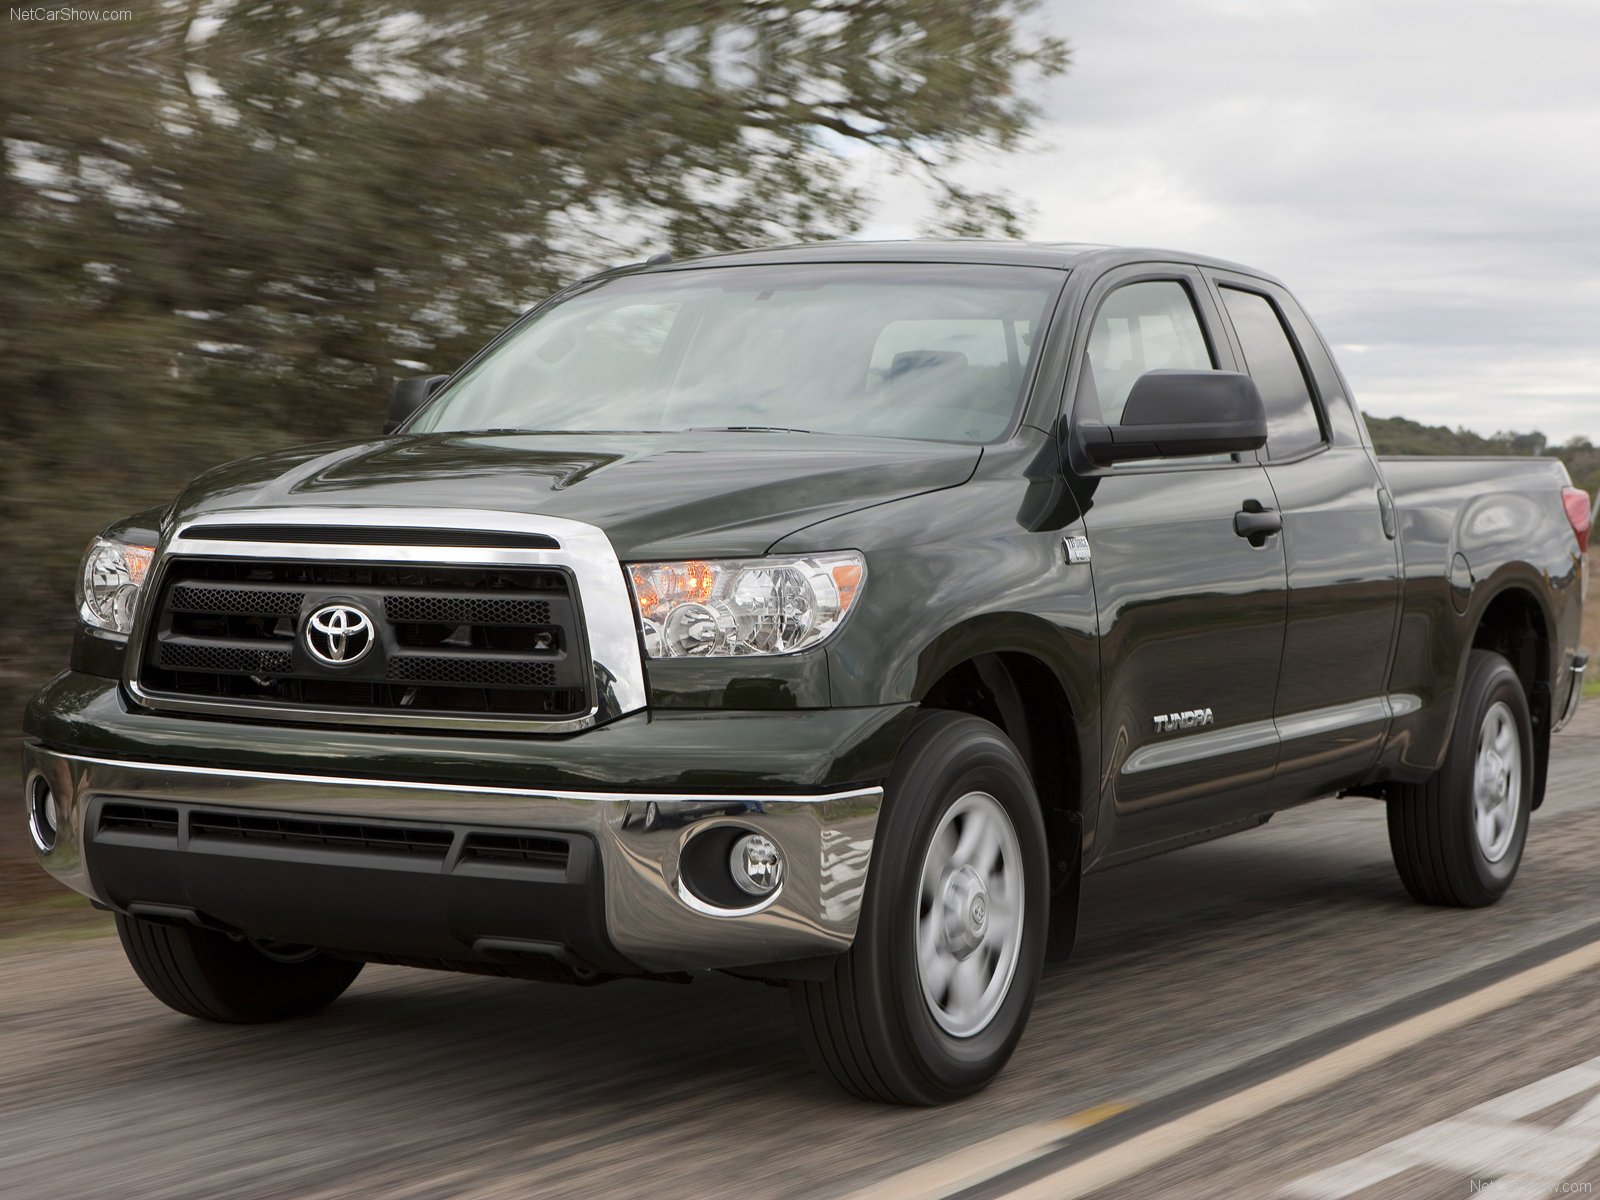 Toyota Tundra Wallpapers - image #428